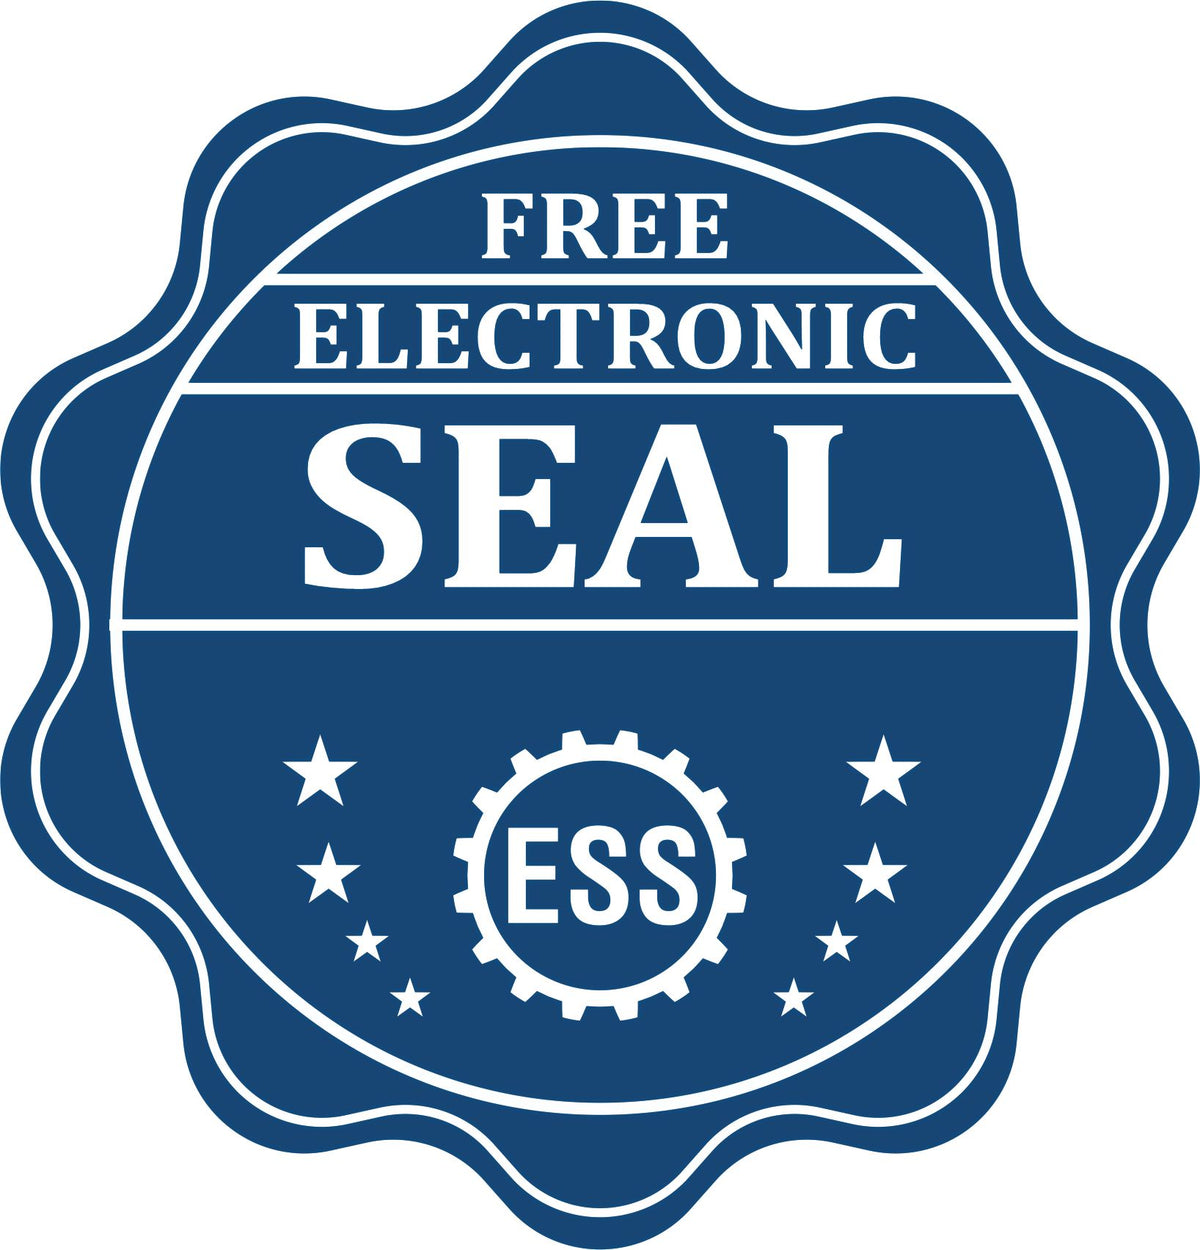 A badge showing a free electronic seal for the Wyoming Geologist Desk Seal with stars and the ESS gear on the emblem.